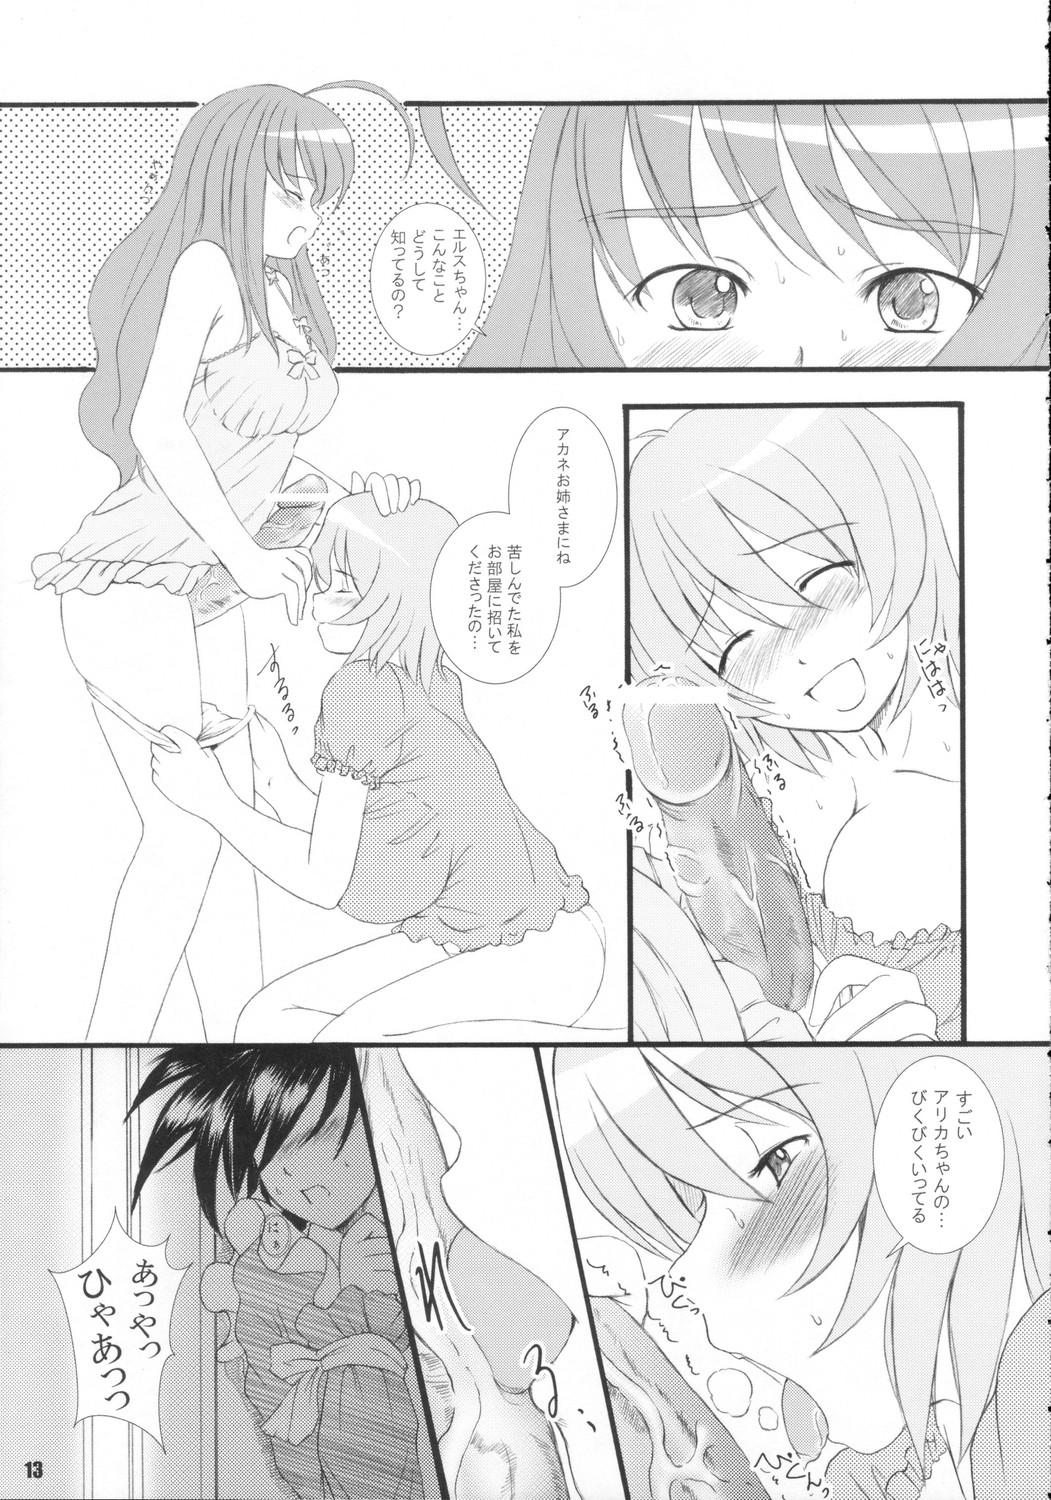 Groping KS Extra #4 - Mai-otome Reverse Cowgirl - Page 12